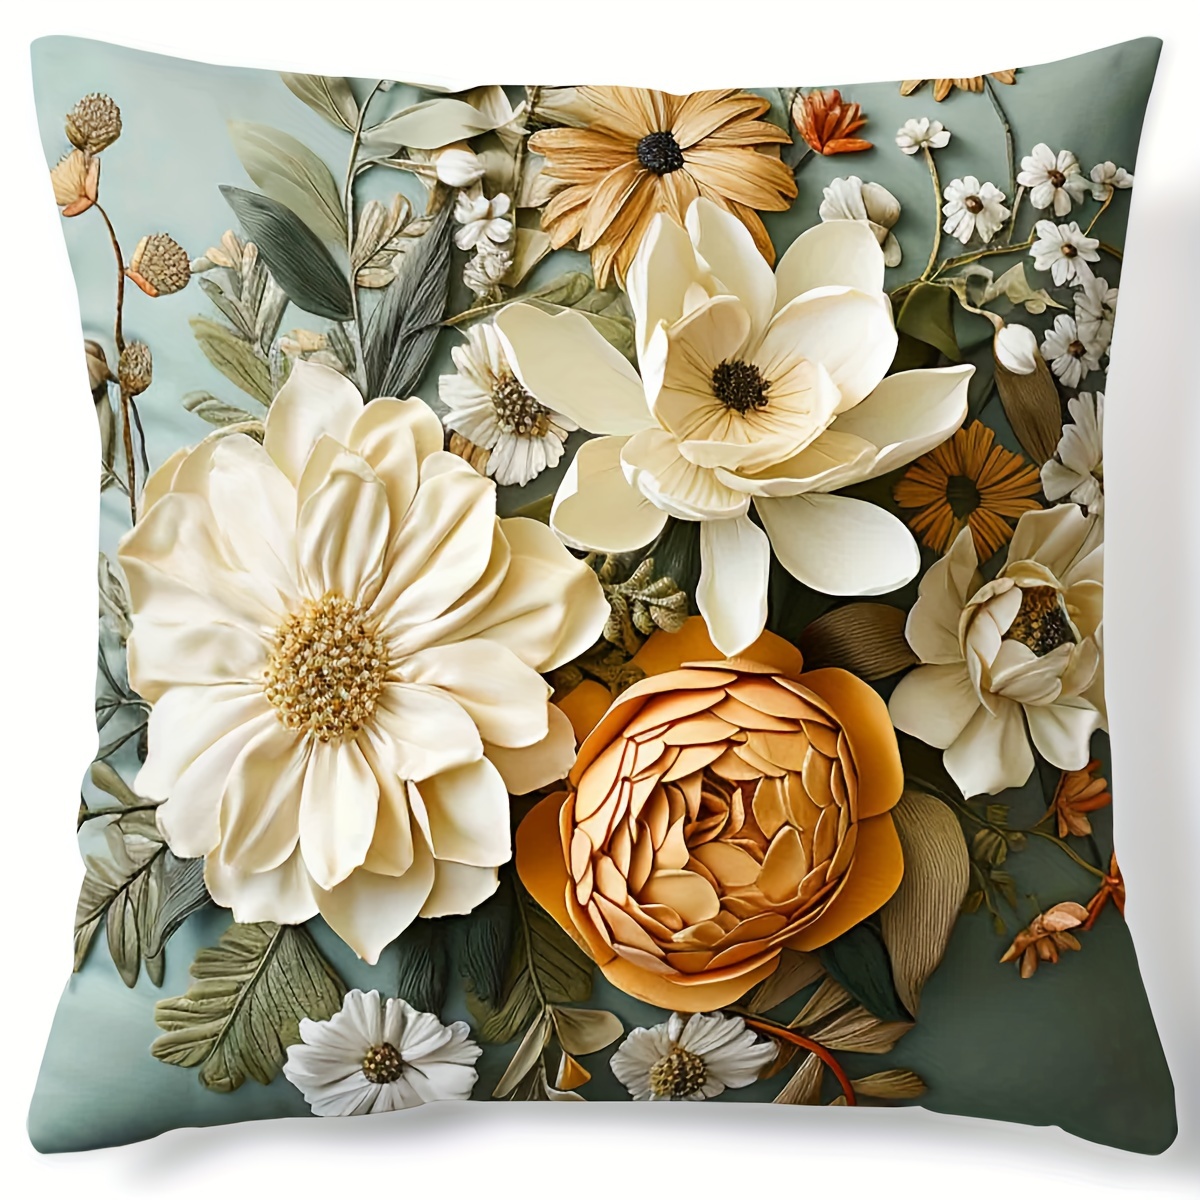 

1pc Contemporary Style Floral Digital Print Cushion Cover, 45cm/17.71inch Square, Decorative Pillowcase With Zipper, Botanical Pattern, Home Sofa Decor